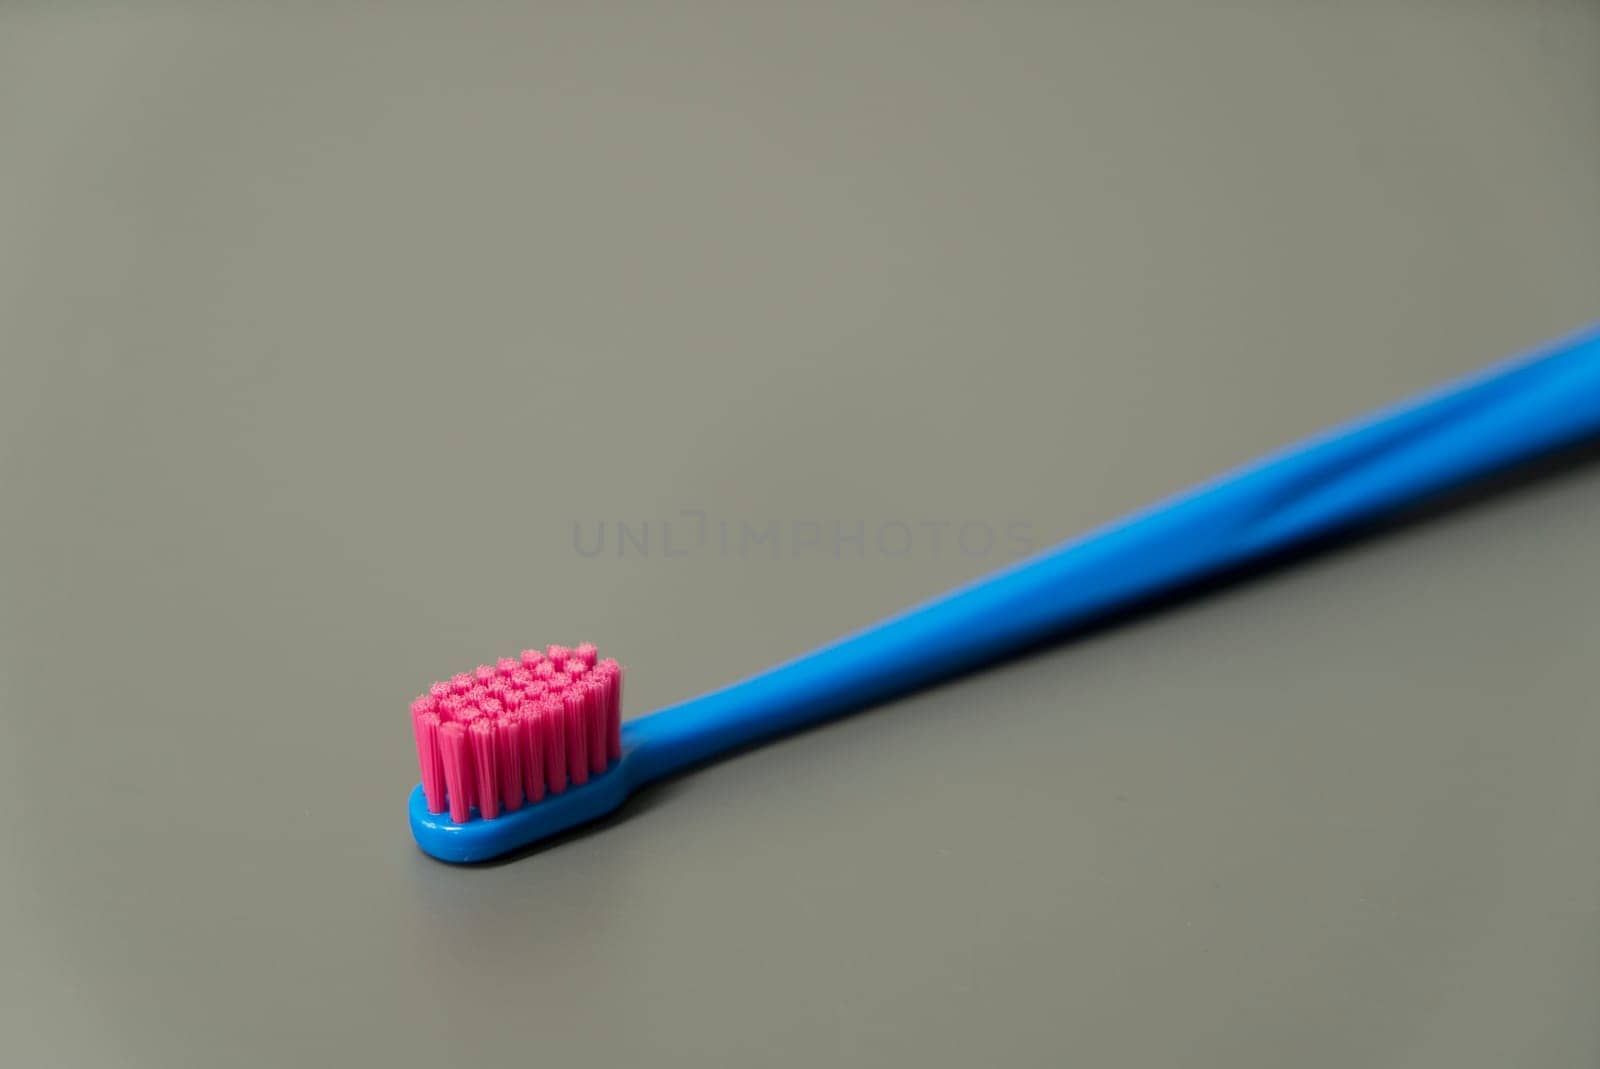 Plastic toothbrush on grey background. Blue and pink color brush. Healthcare, hygiene for teeth.